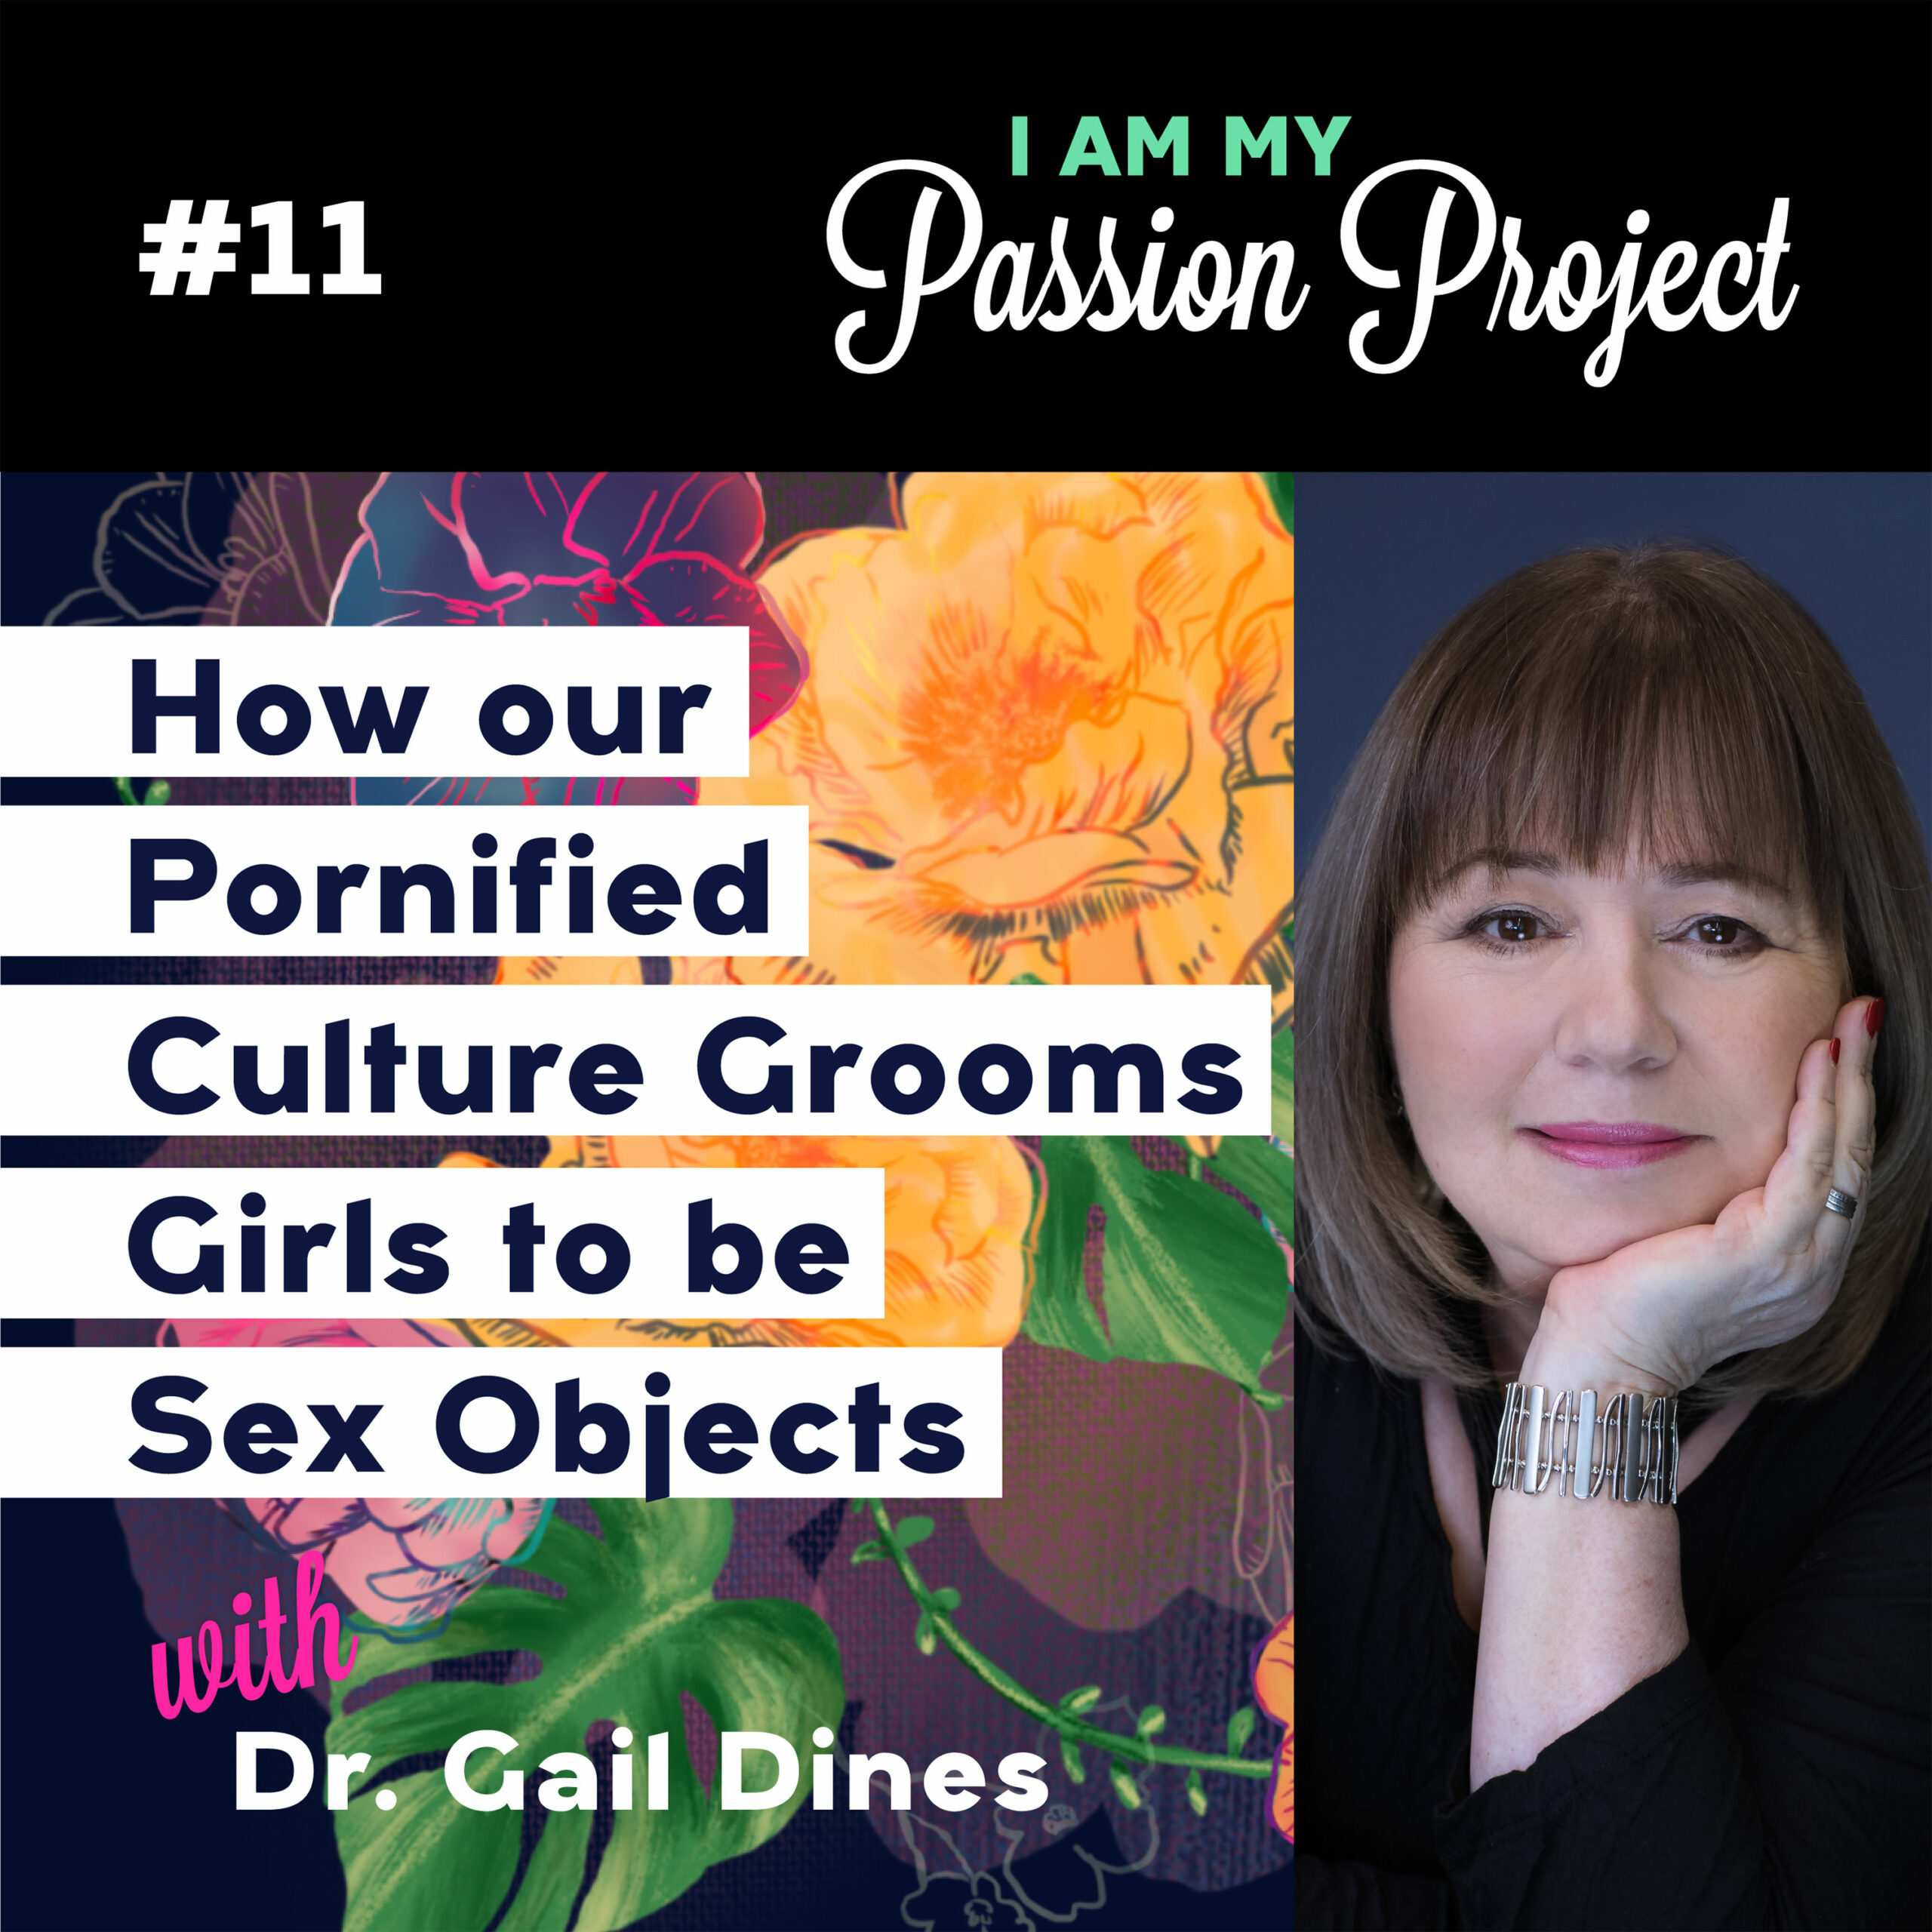 How our Pornified Culture Grooms Girls to be Sex Objects, with Dr. Gail Dines